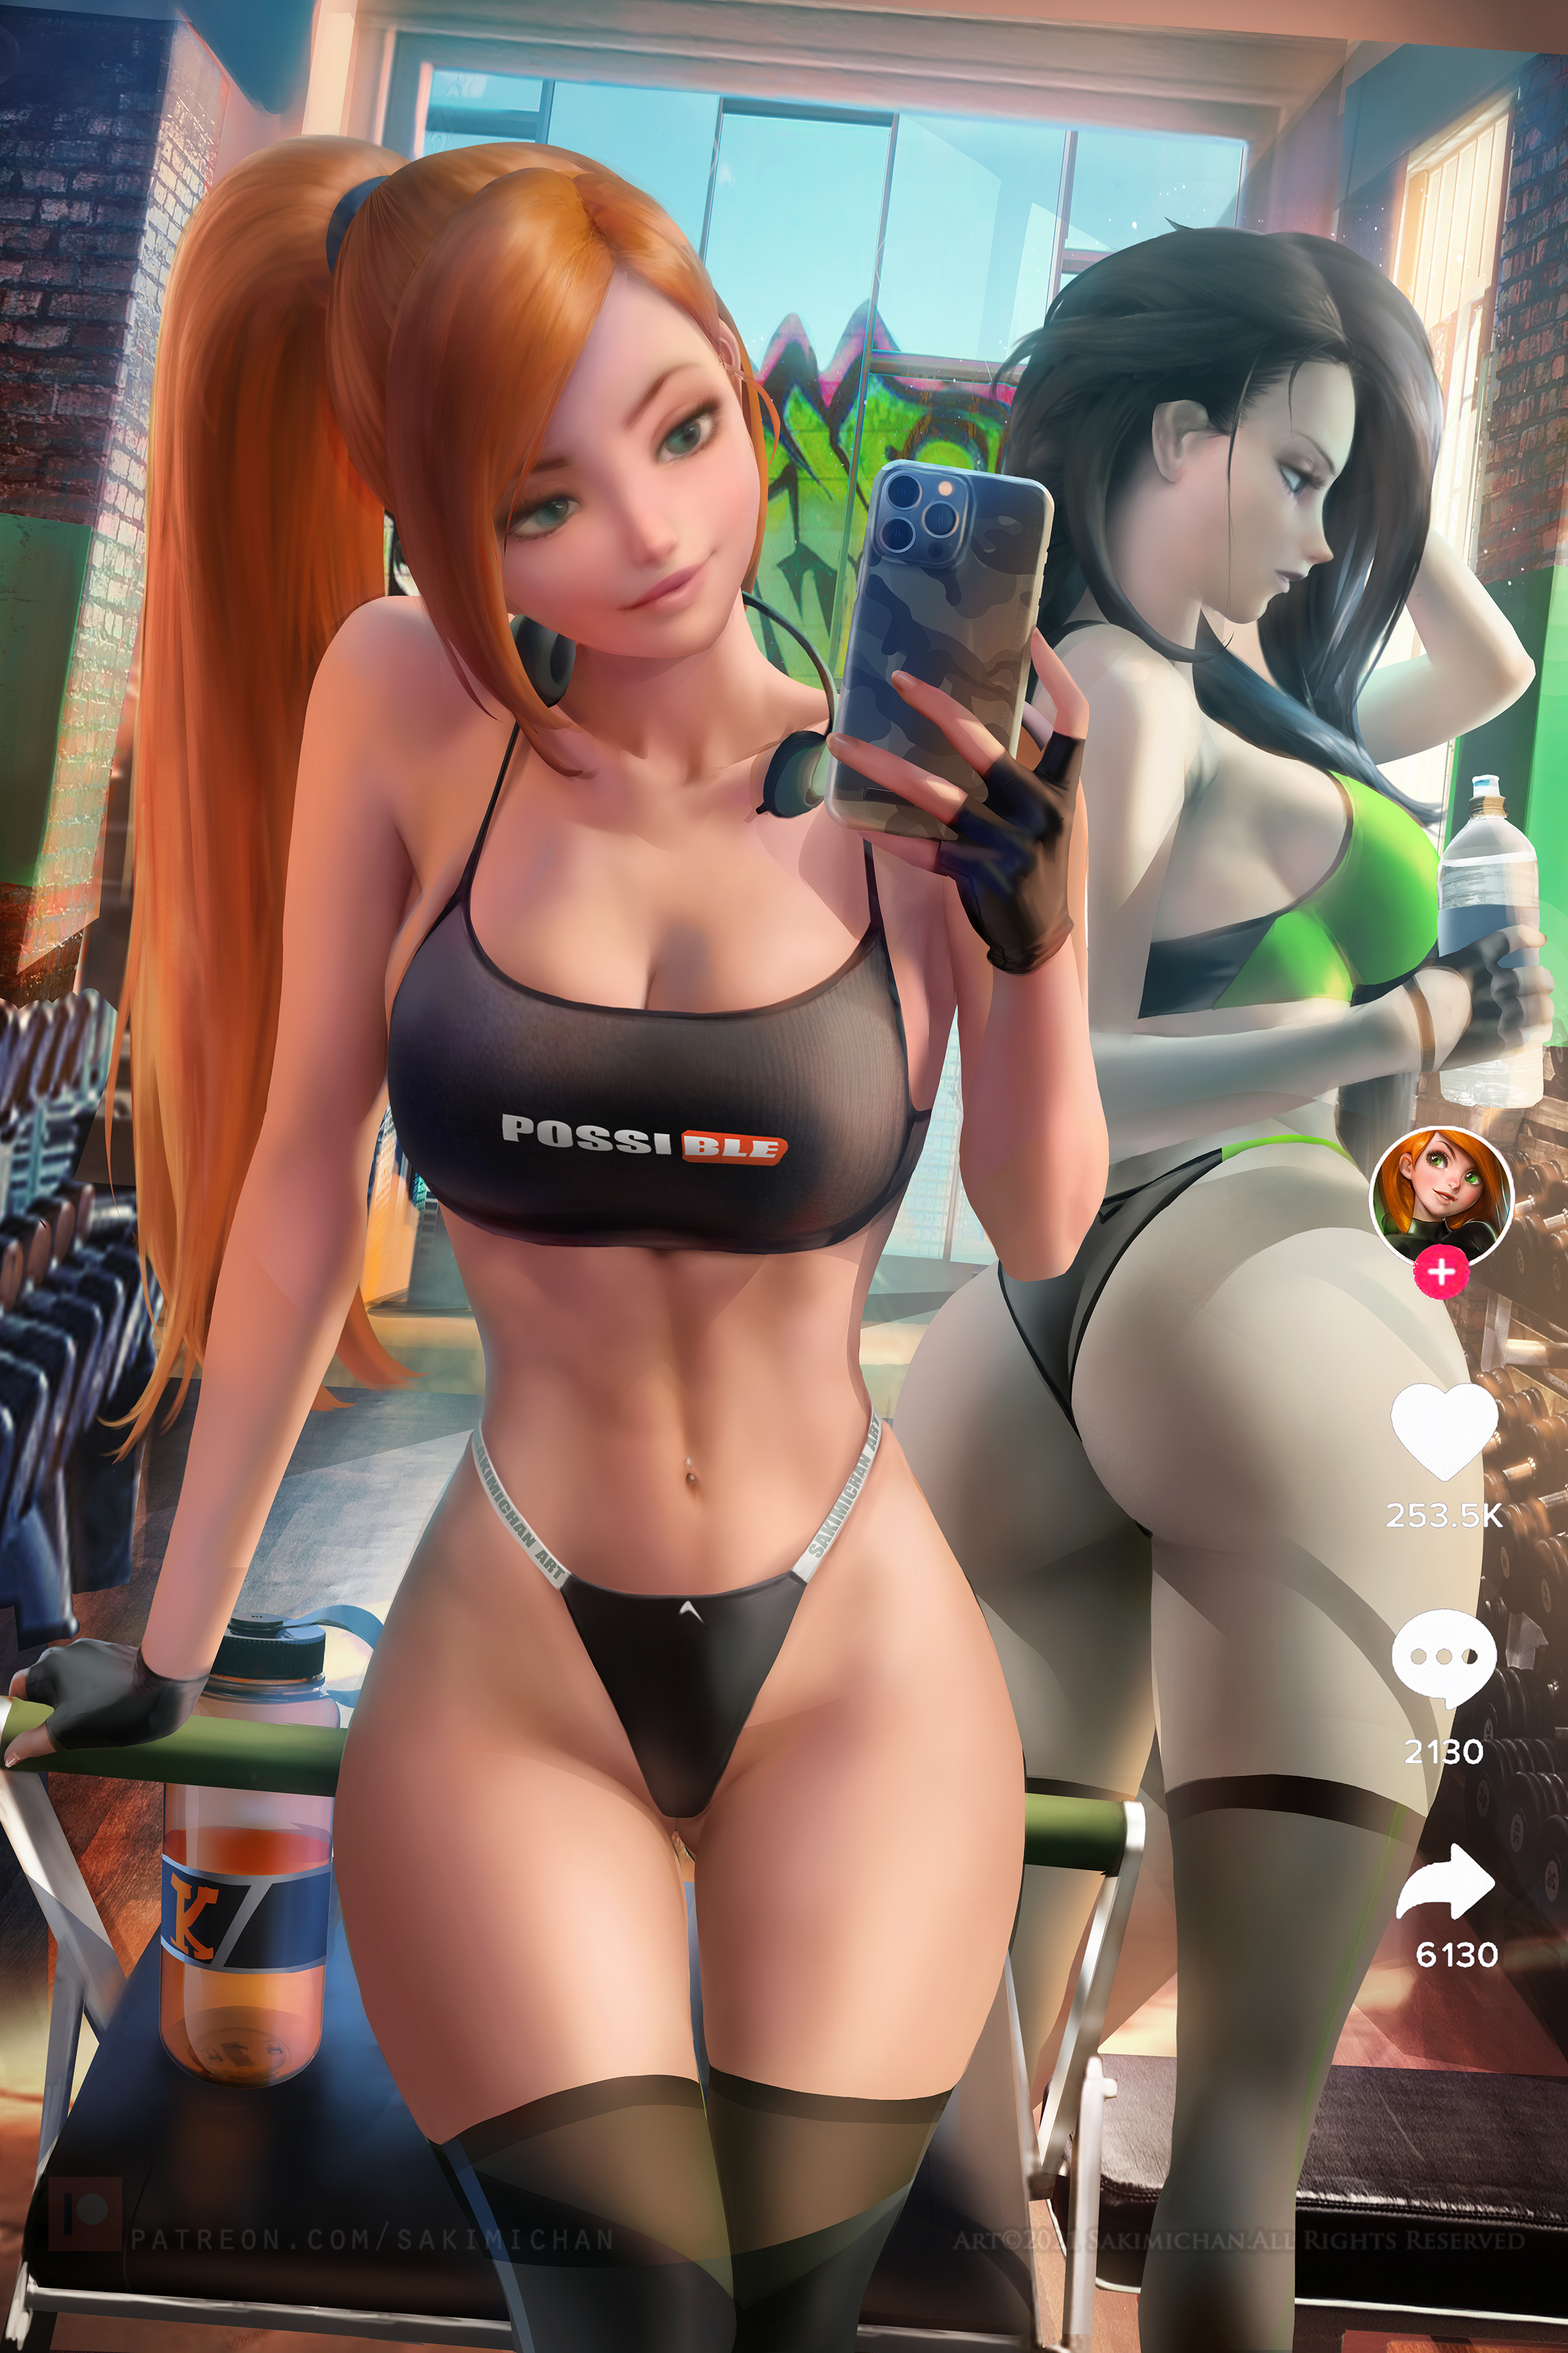 General 2333x3500 Kimberly Ann Possible Shego Kim Possible TV series fictional character 2D artwork drawing fan art Sakimichan gyms selfies reflection cartoon stockings sports bra water bottle cleavage ponytail ass big boobs sideboob phone